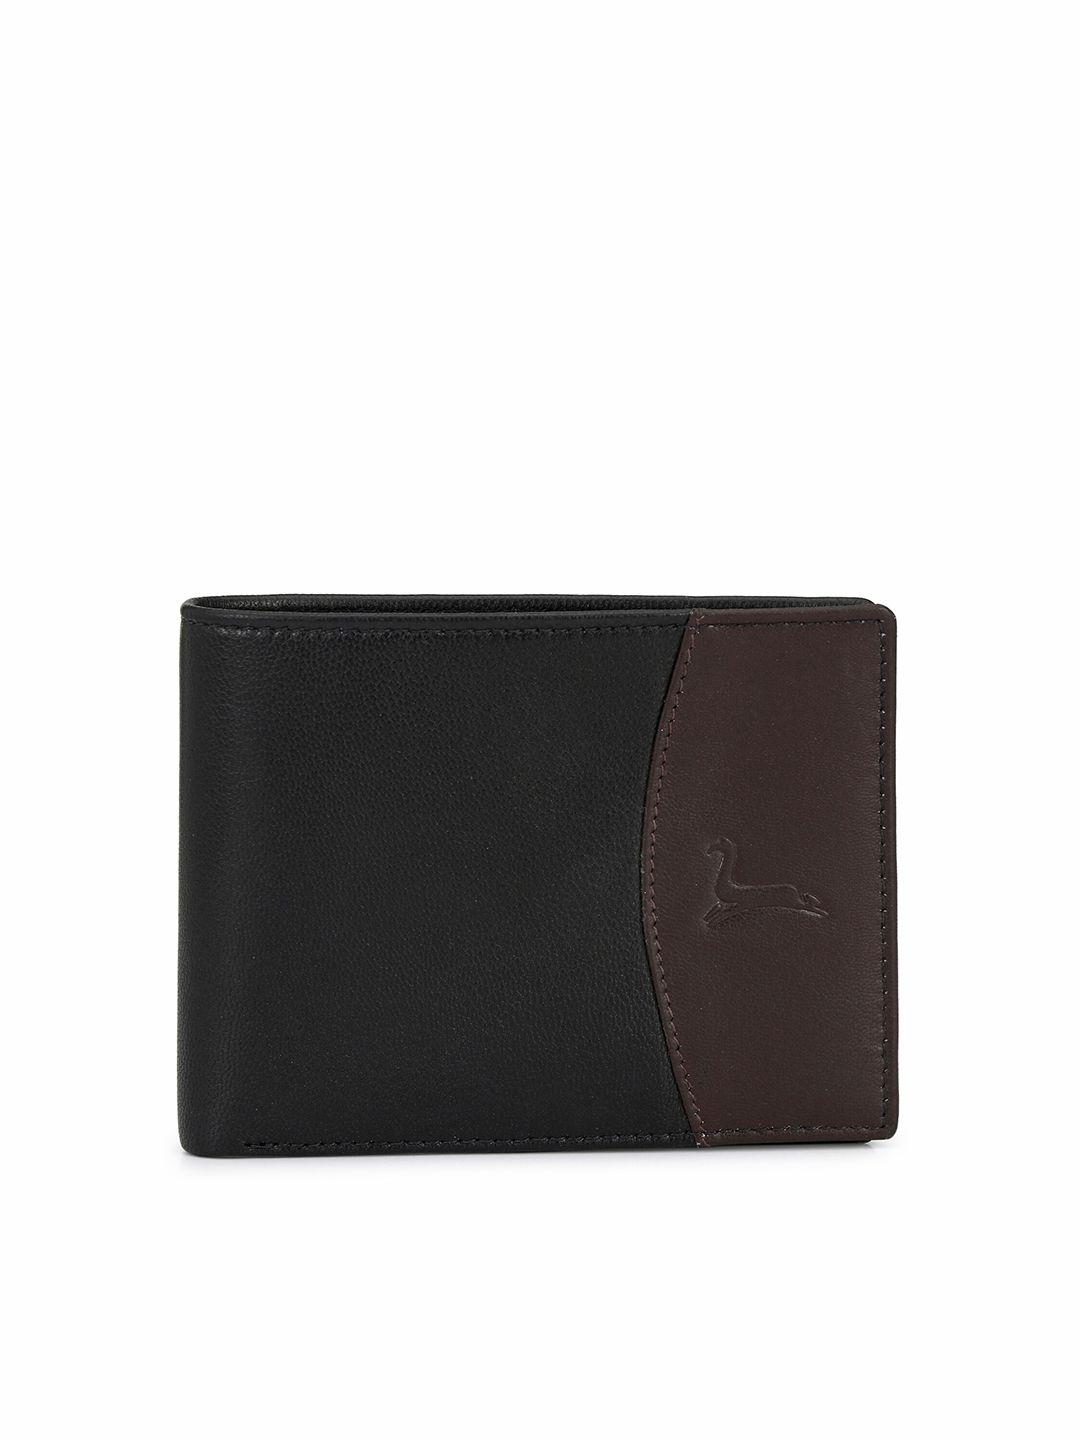 pacific gold men leather two fold wallet